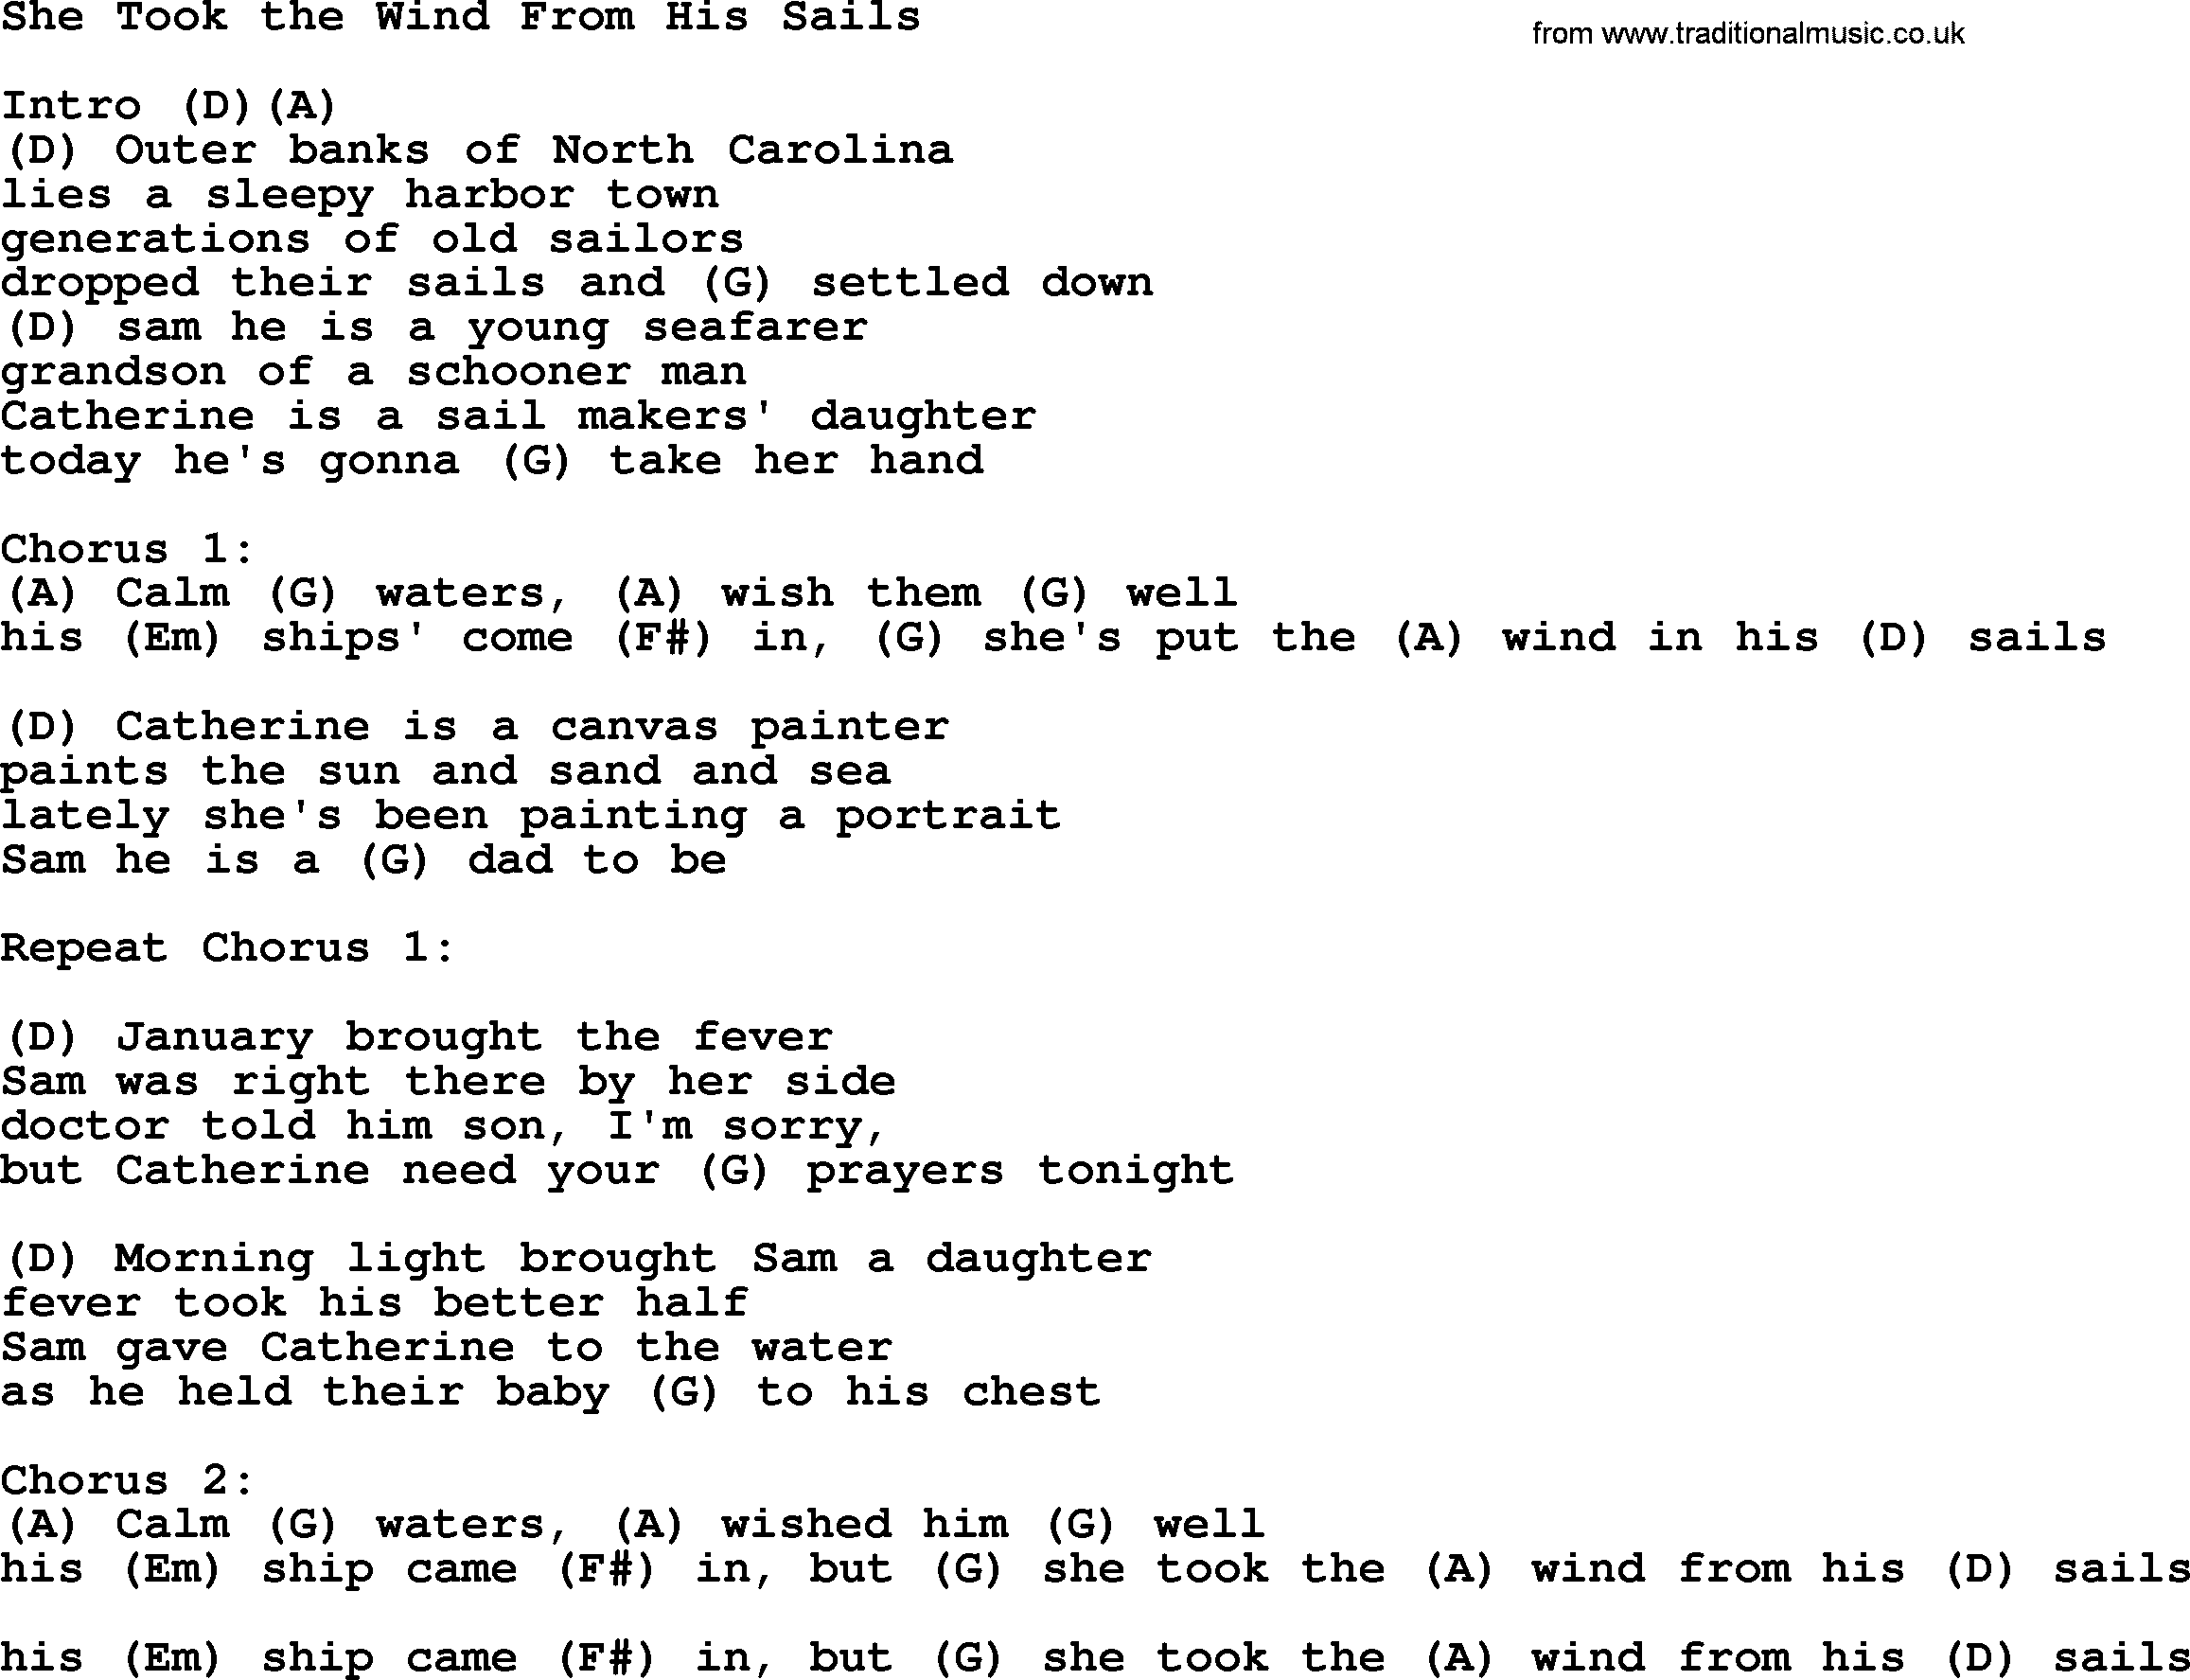 George Strait song: She Took the Wind From His Sails, lyrics and chords